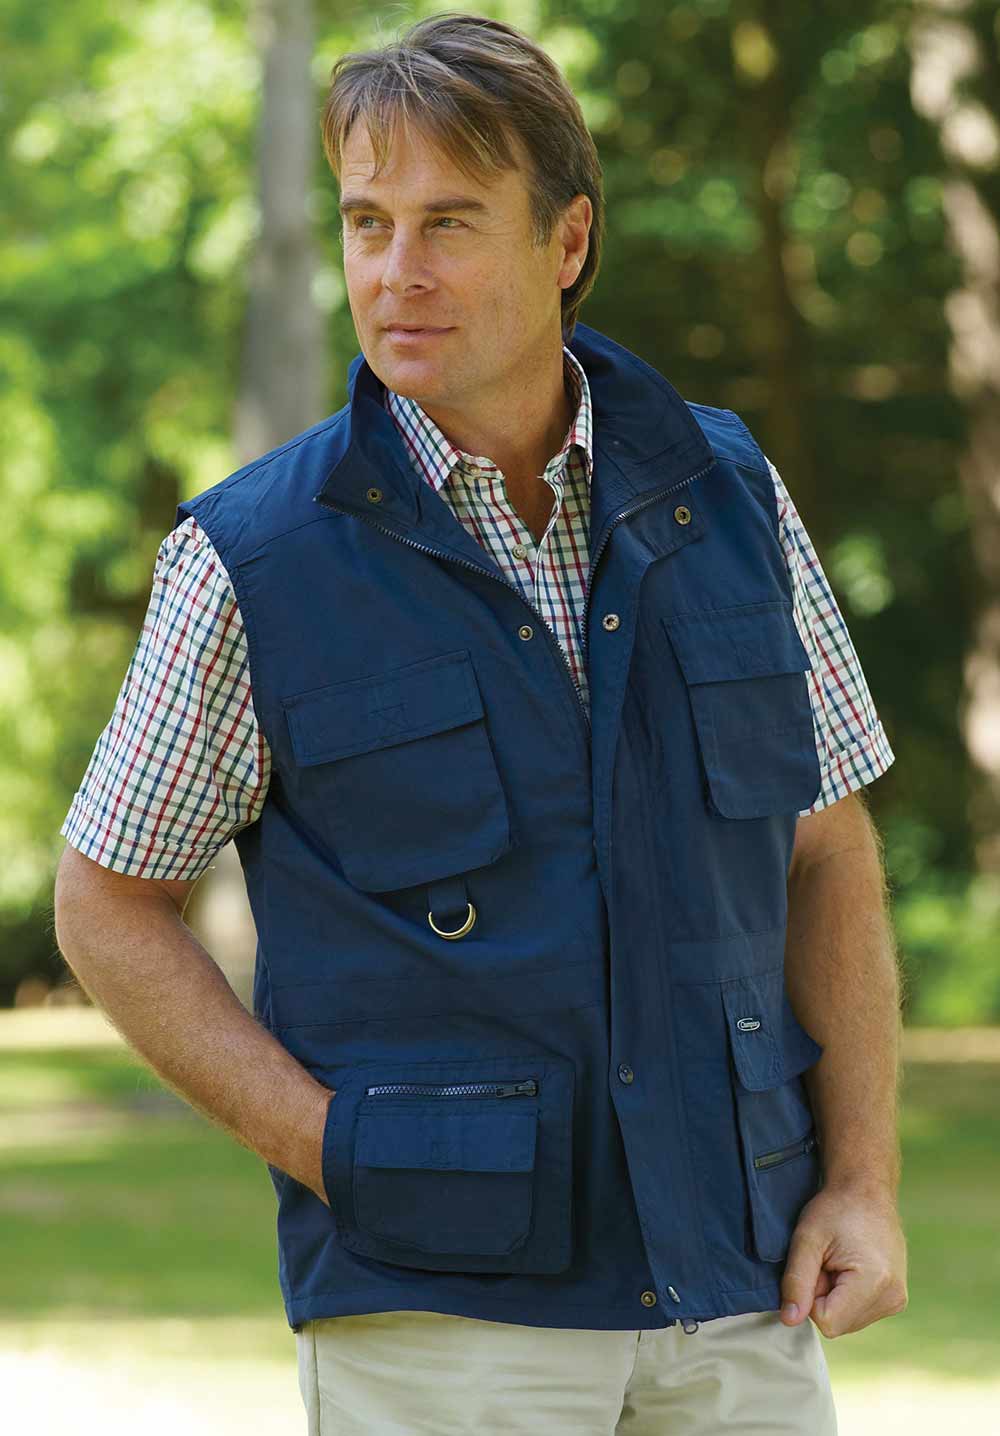 Champion Windermere Gilet In Navy  